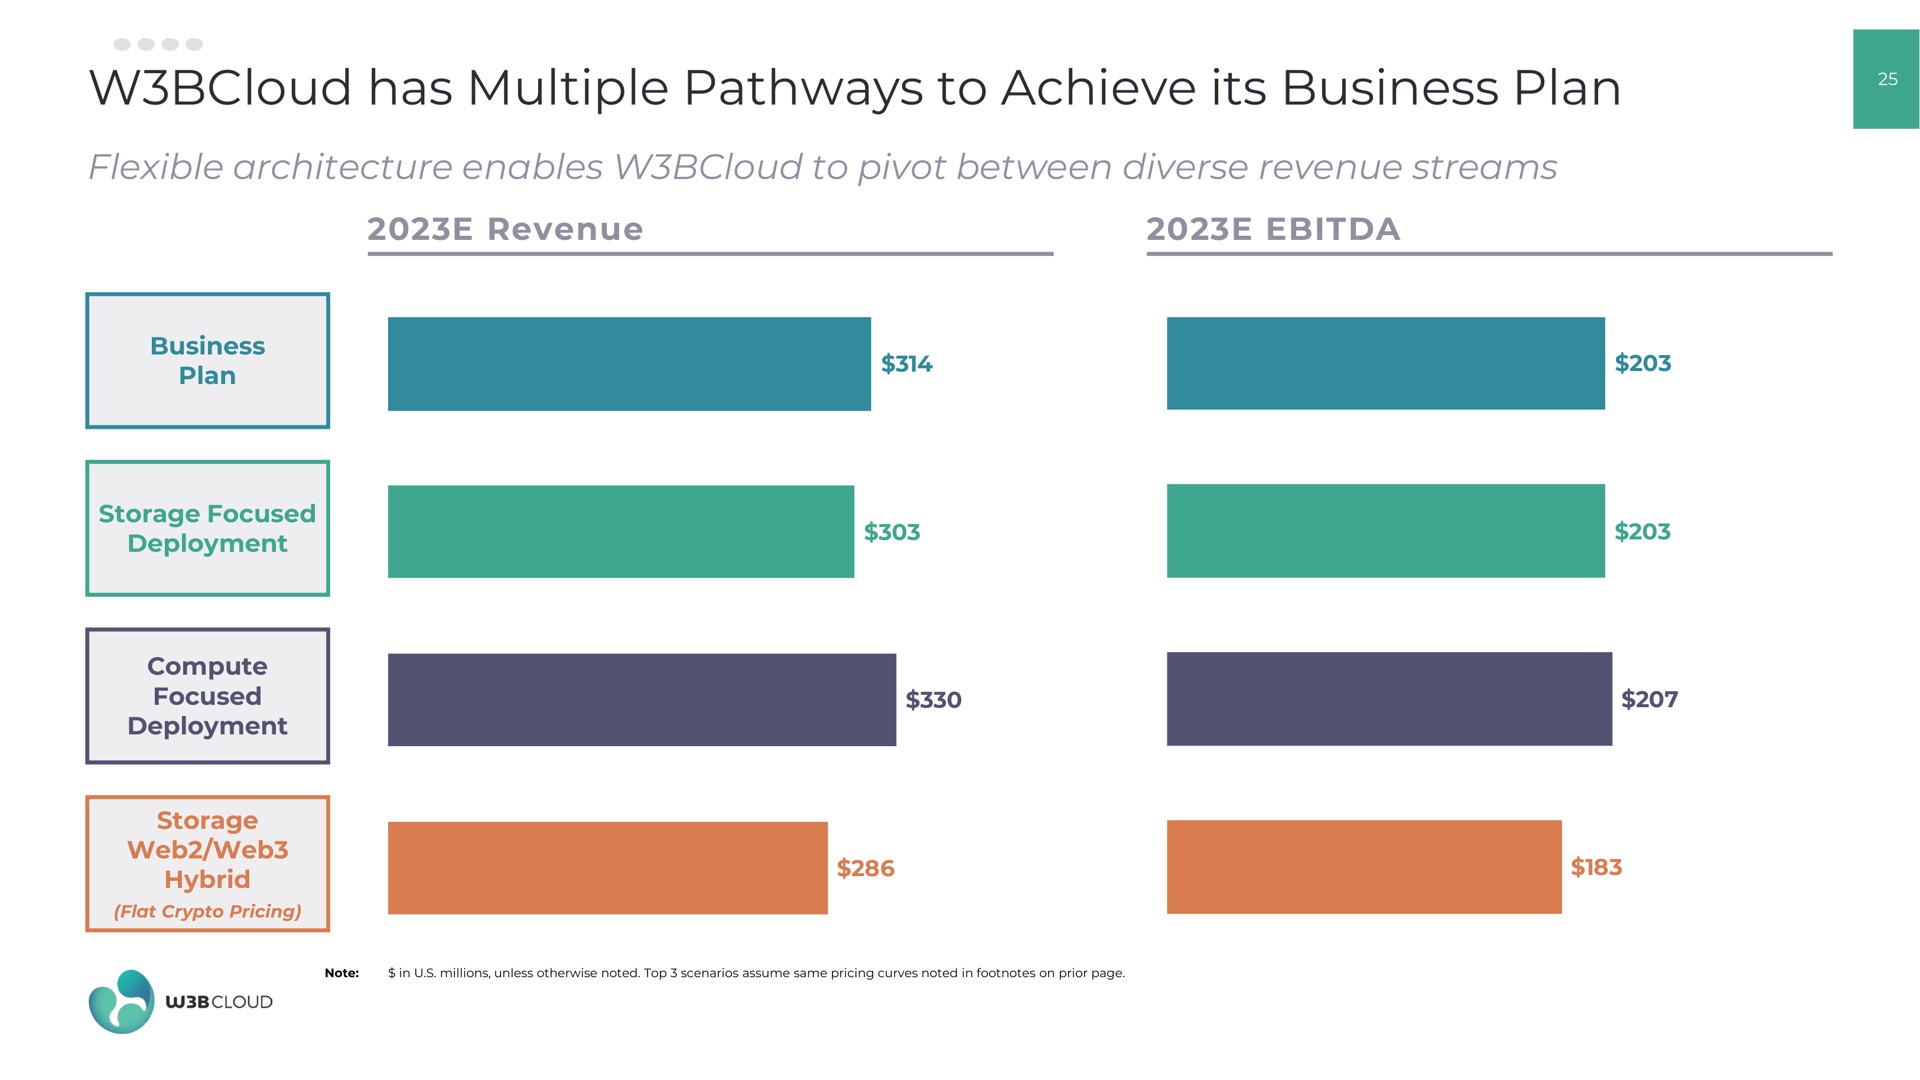 has multiple pathways to achieve its business plan | W3BCLOUD